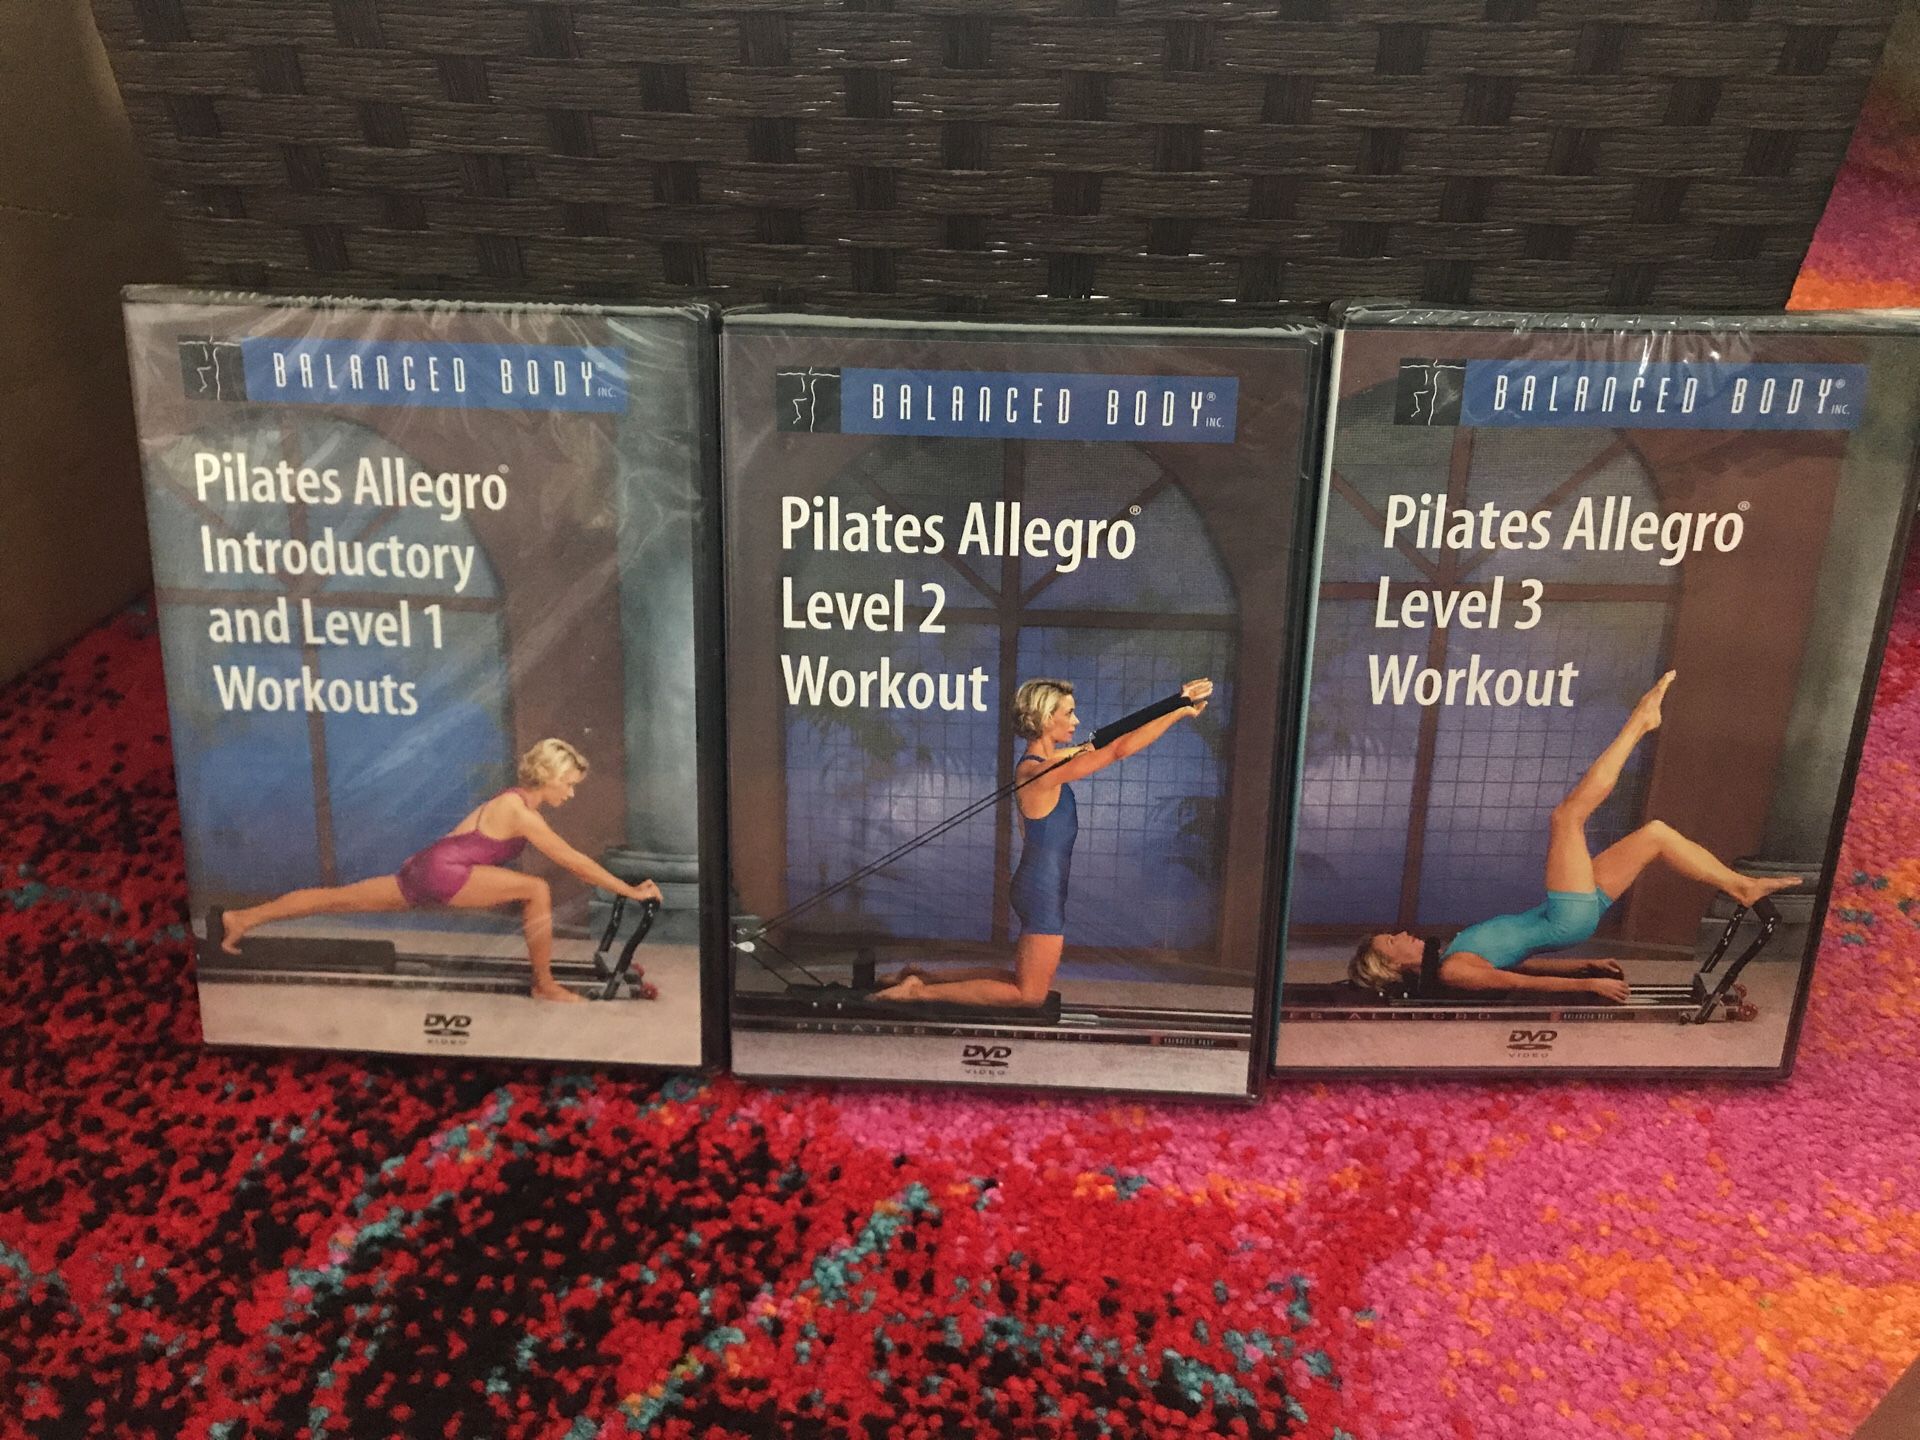 Teaching Pilates Allegro? These will help you! Set of 3 Unopened Instructional DVD’s